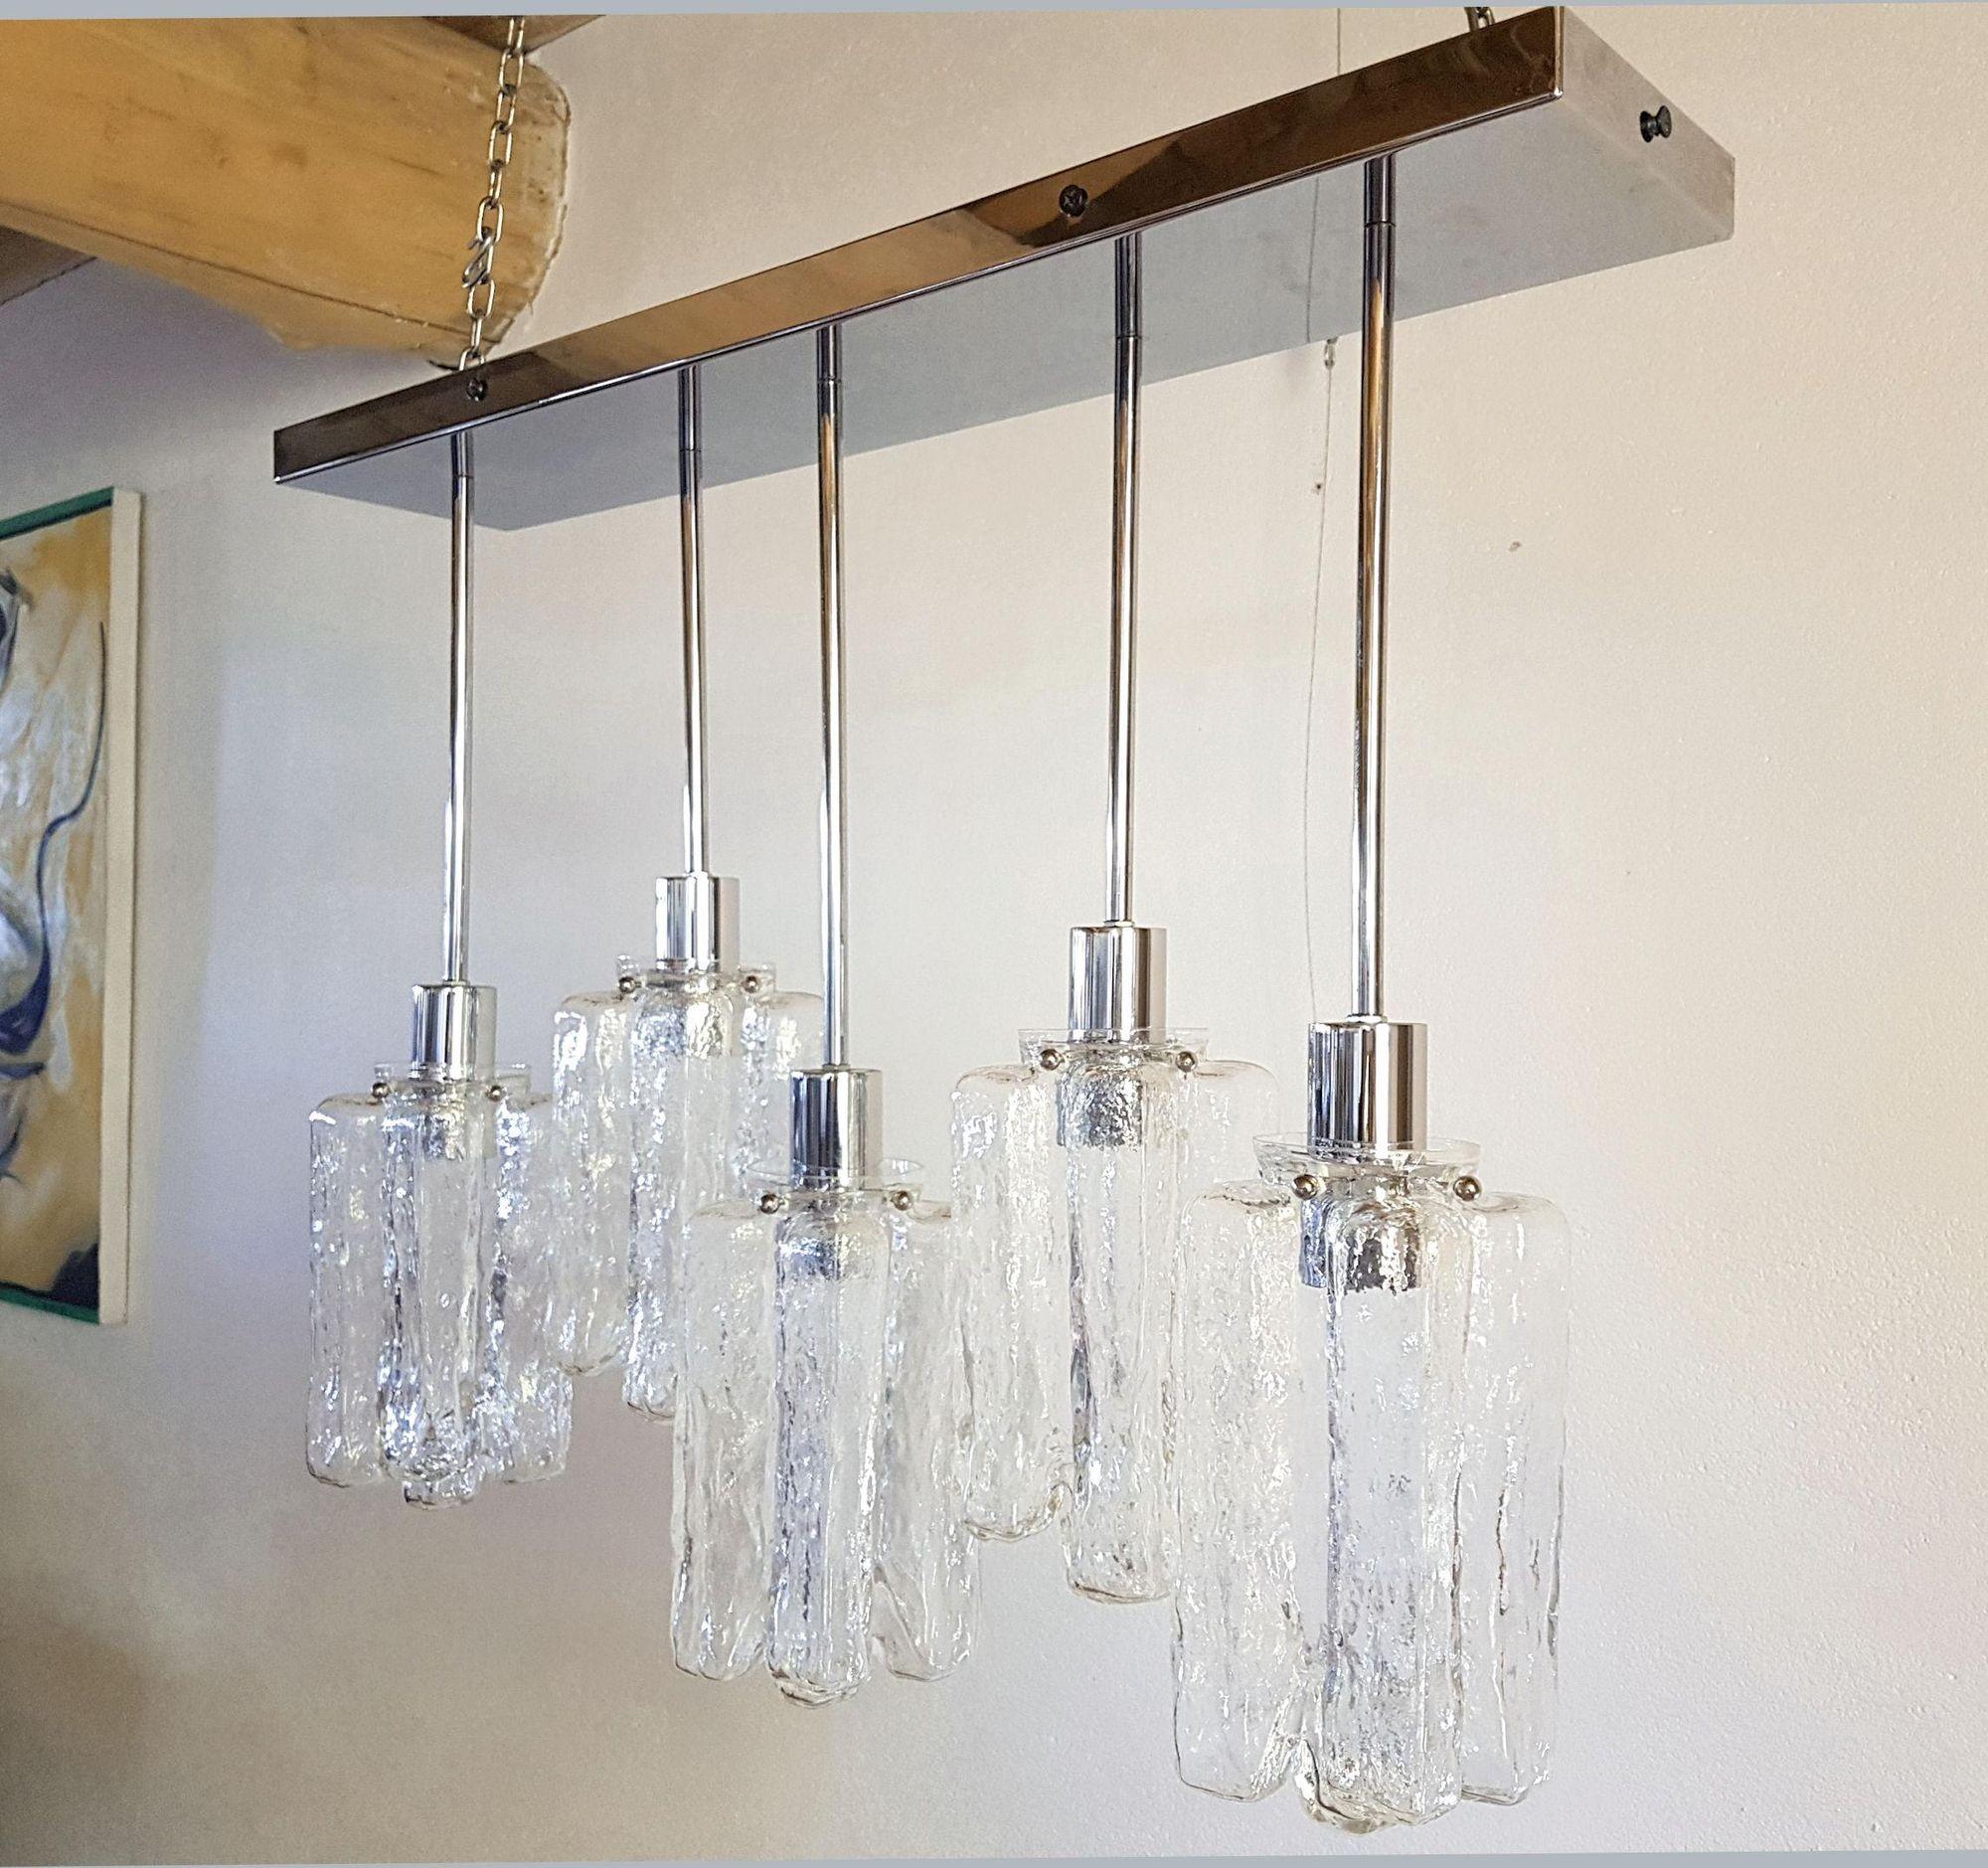 Elongated flush mount chandelier attributed to Kalmar, Italy and Austria 1980s.
The Mid-Century Modern Italian chandelier is made of a rectangular chrome base and 5 clear Murano glass pendants in two heights.
Each Kalmar Murano glass is nesting a